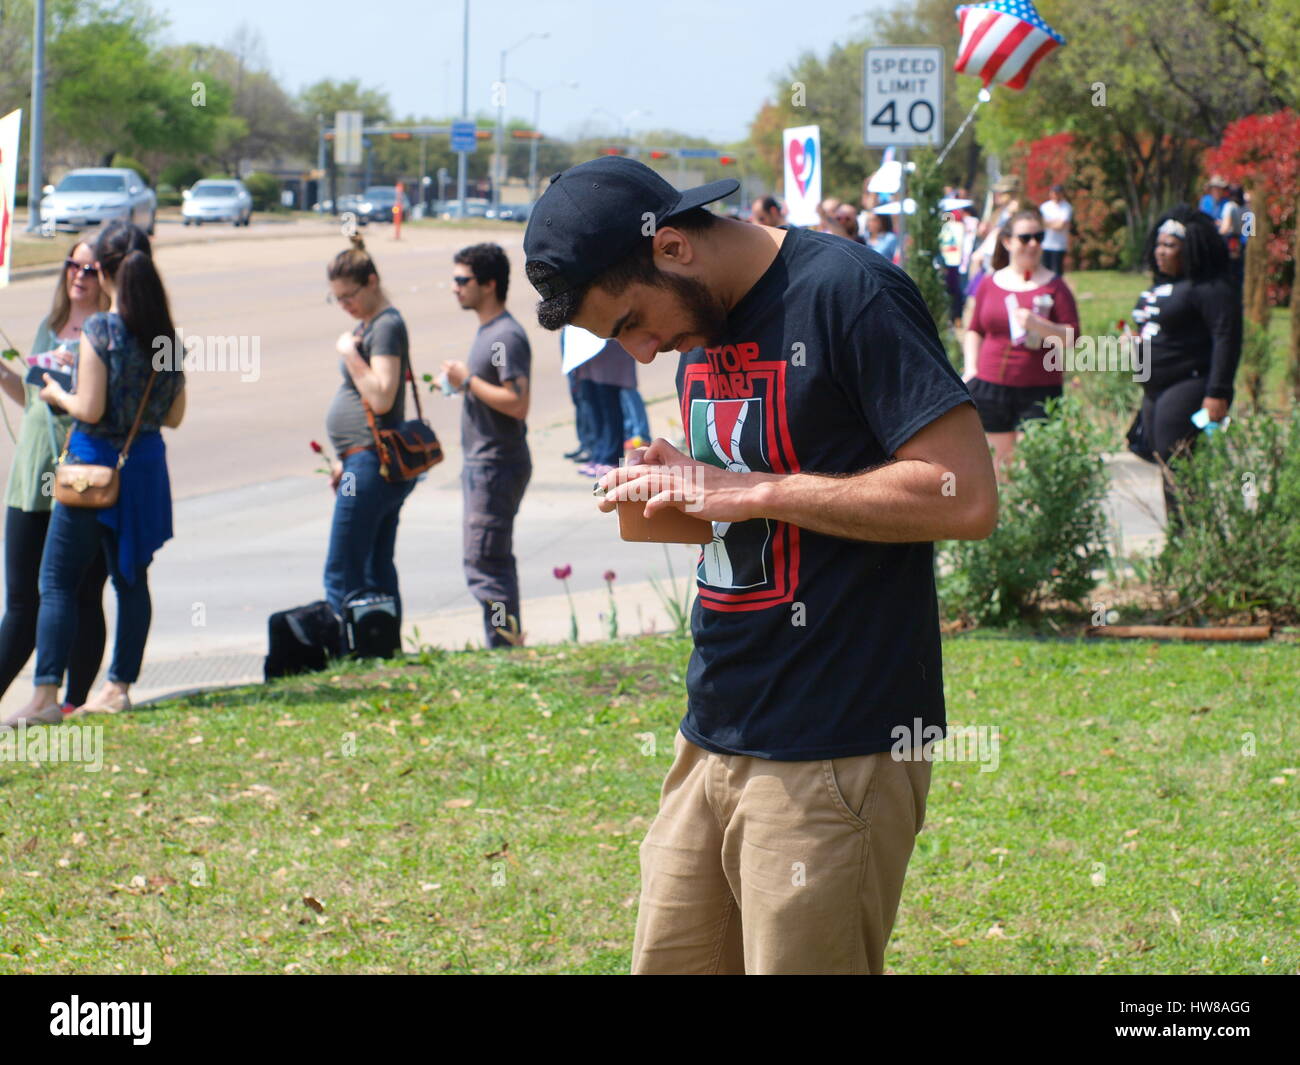 Dallas,US,18 March 2017. An armed protest outside the Dallas Central Mosque  ended peacefully with both opposing groups sitting down together over a two hour lunch. Credit: dallaspaparazzo/Alamy Live News. Stock Photo